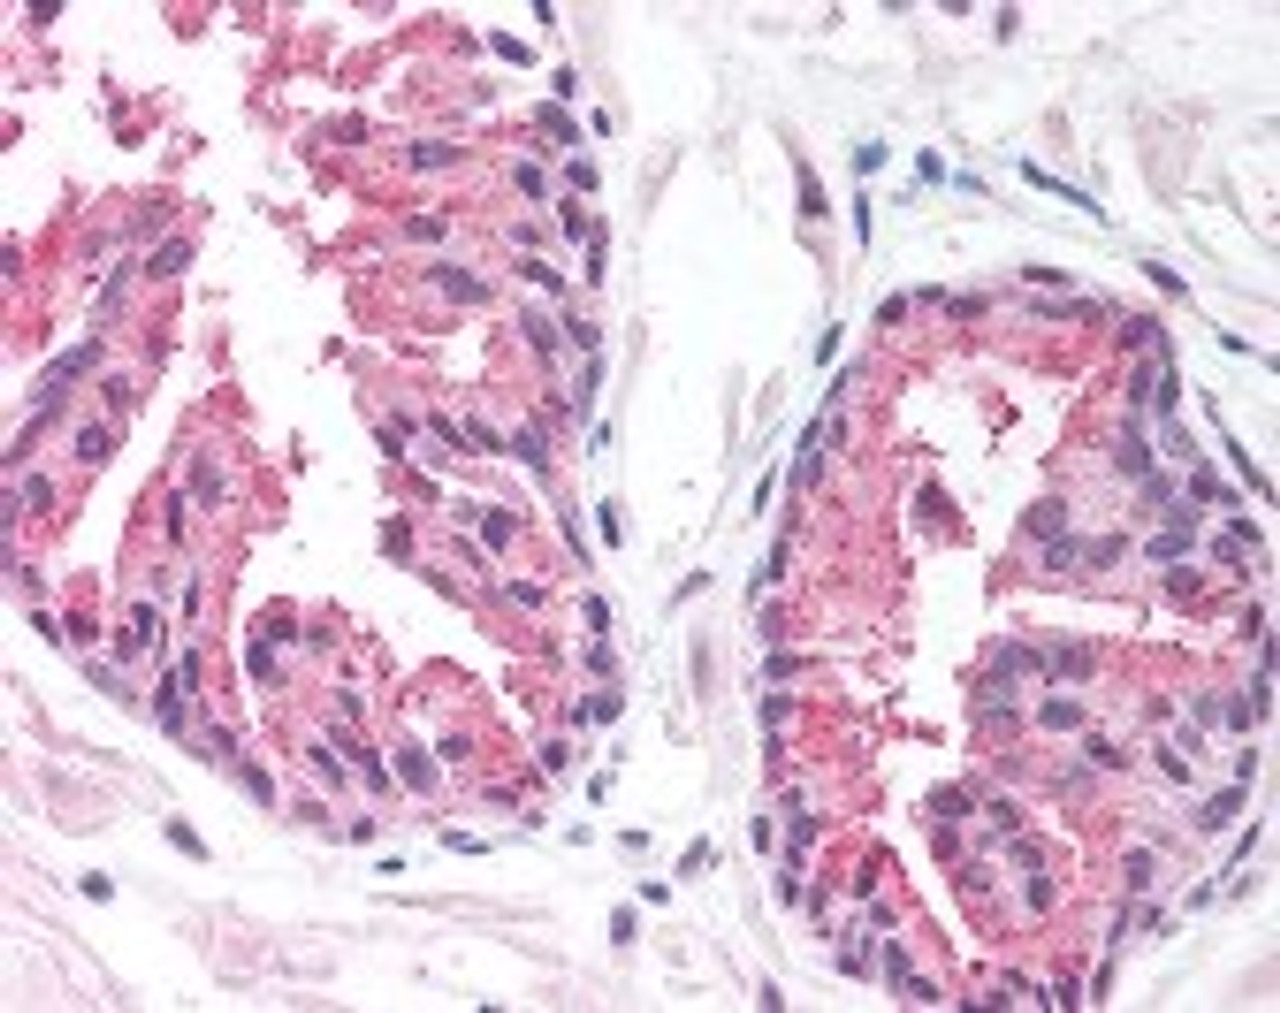 Immunohistochemistry staining of MCTS1 in prostate tissue using MCTS1 Antibody.